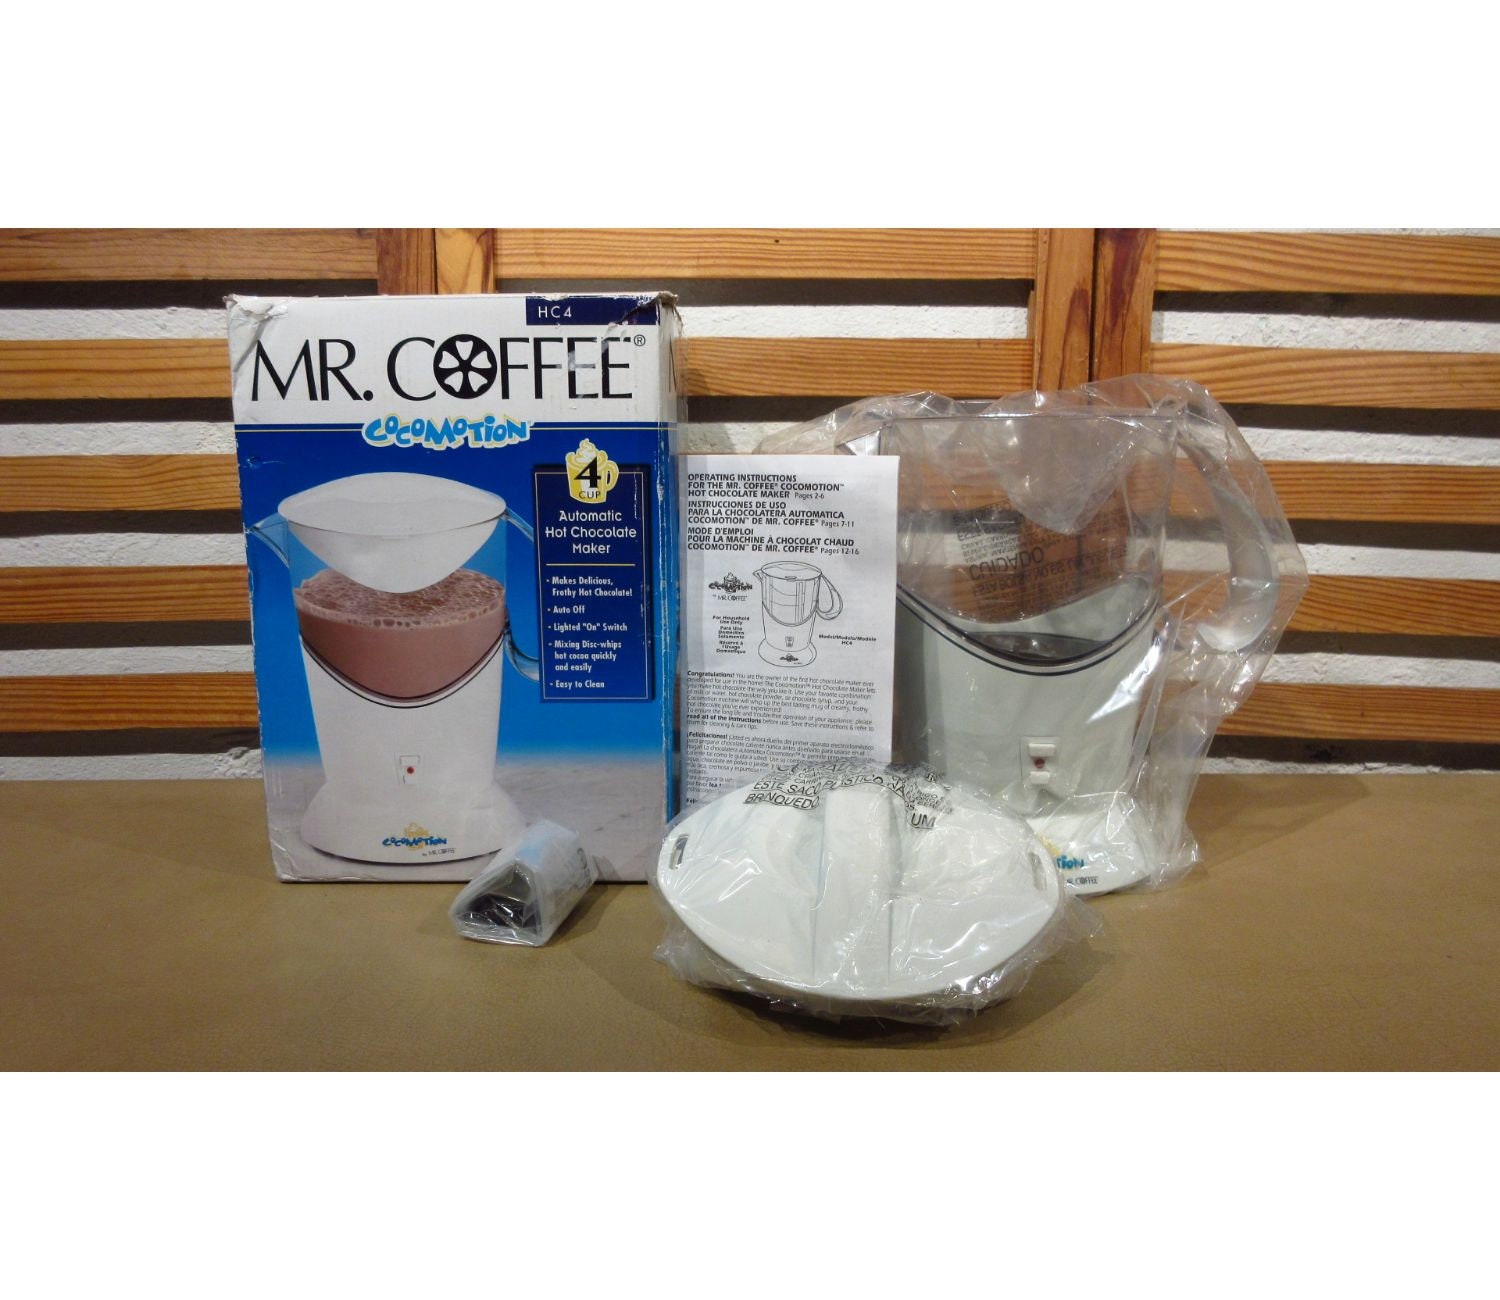 New Discontinued Mr. Coffee Cocomotion Hot Chocolate Maker in 